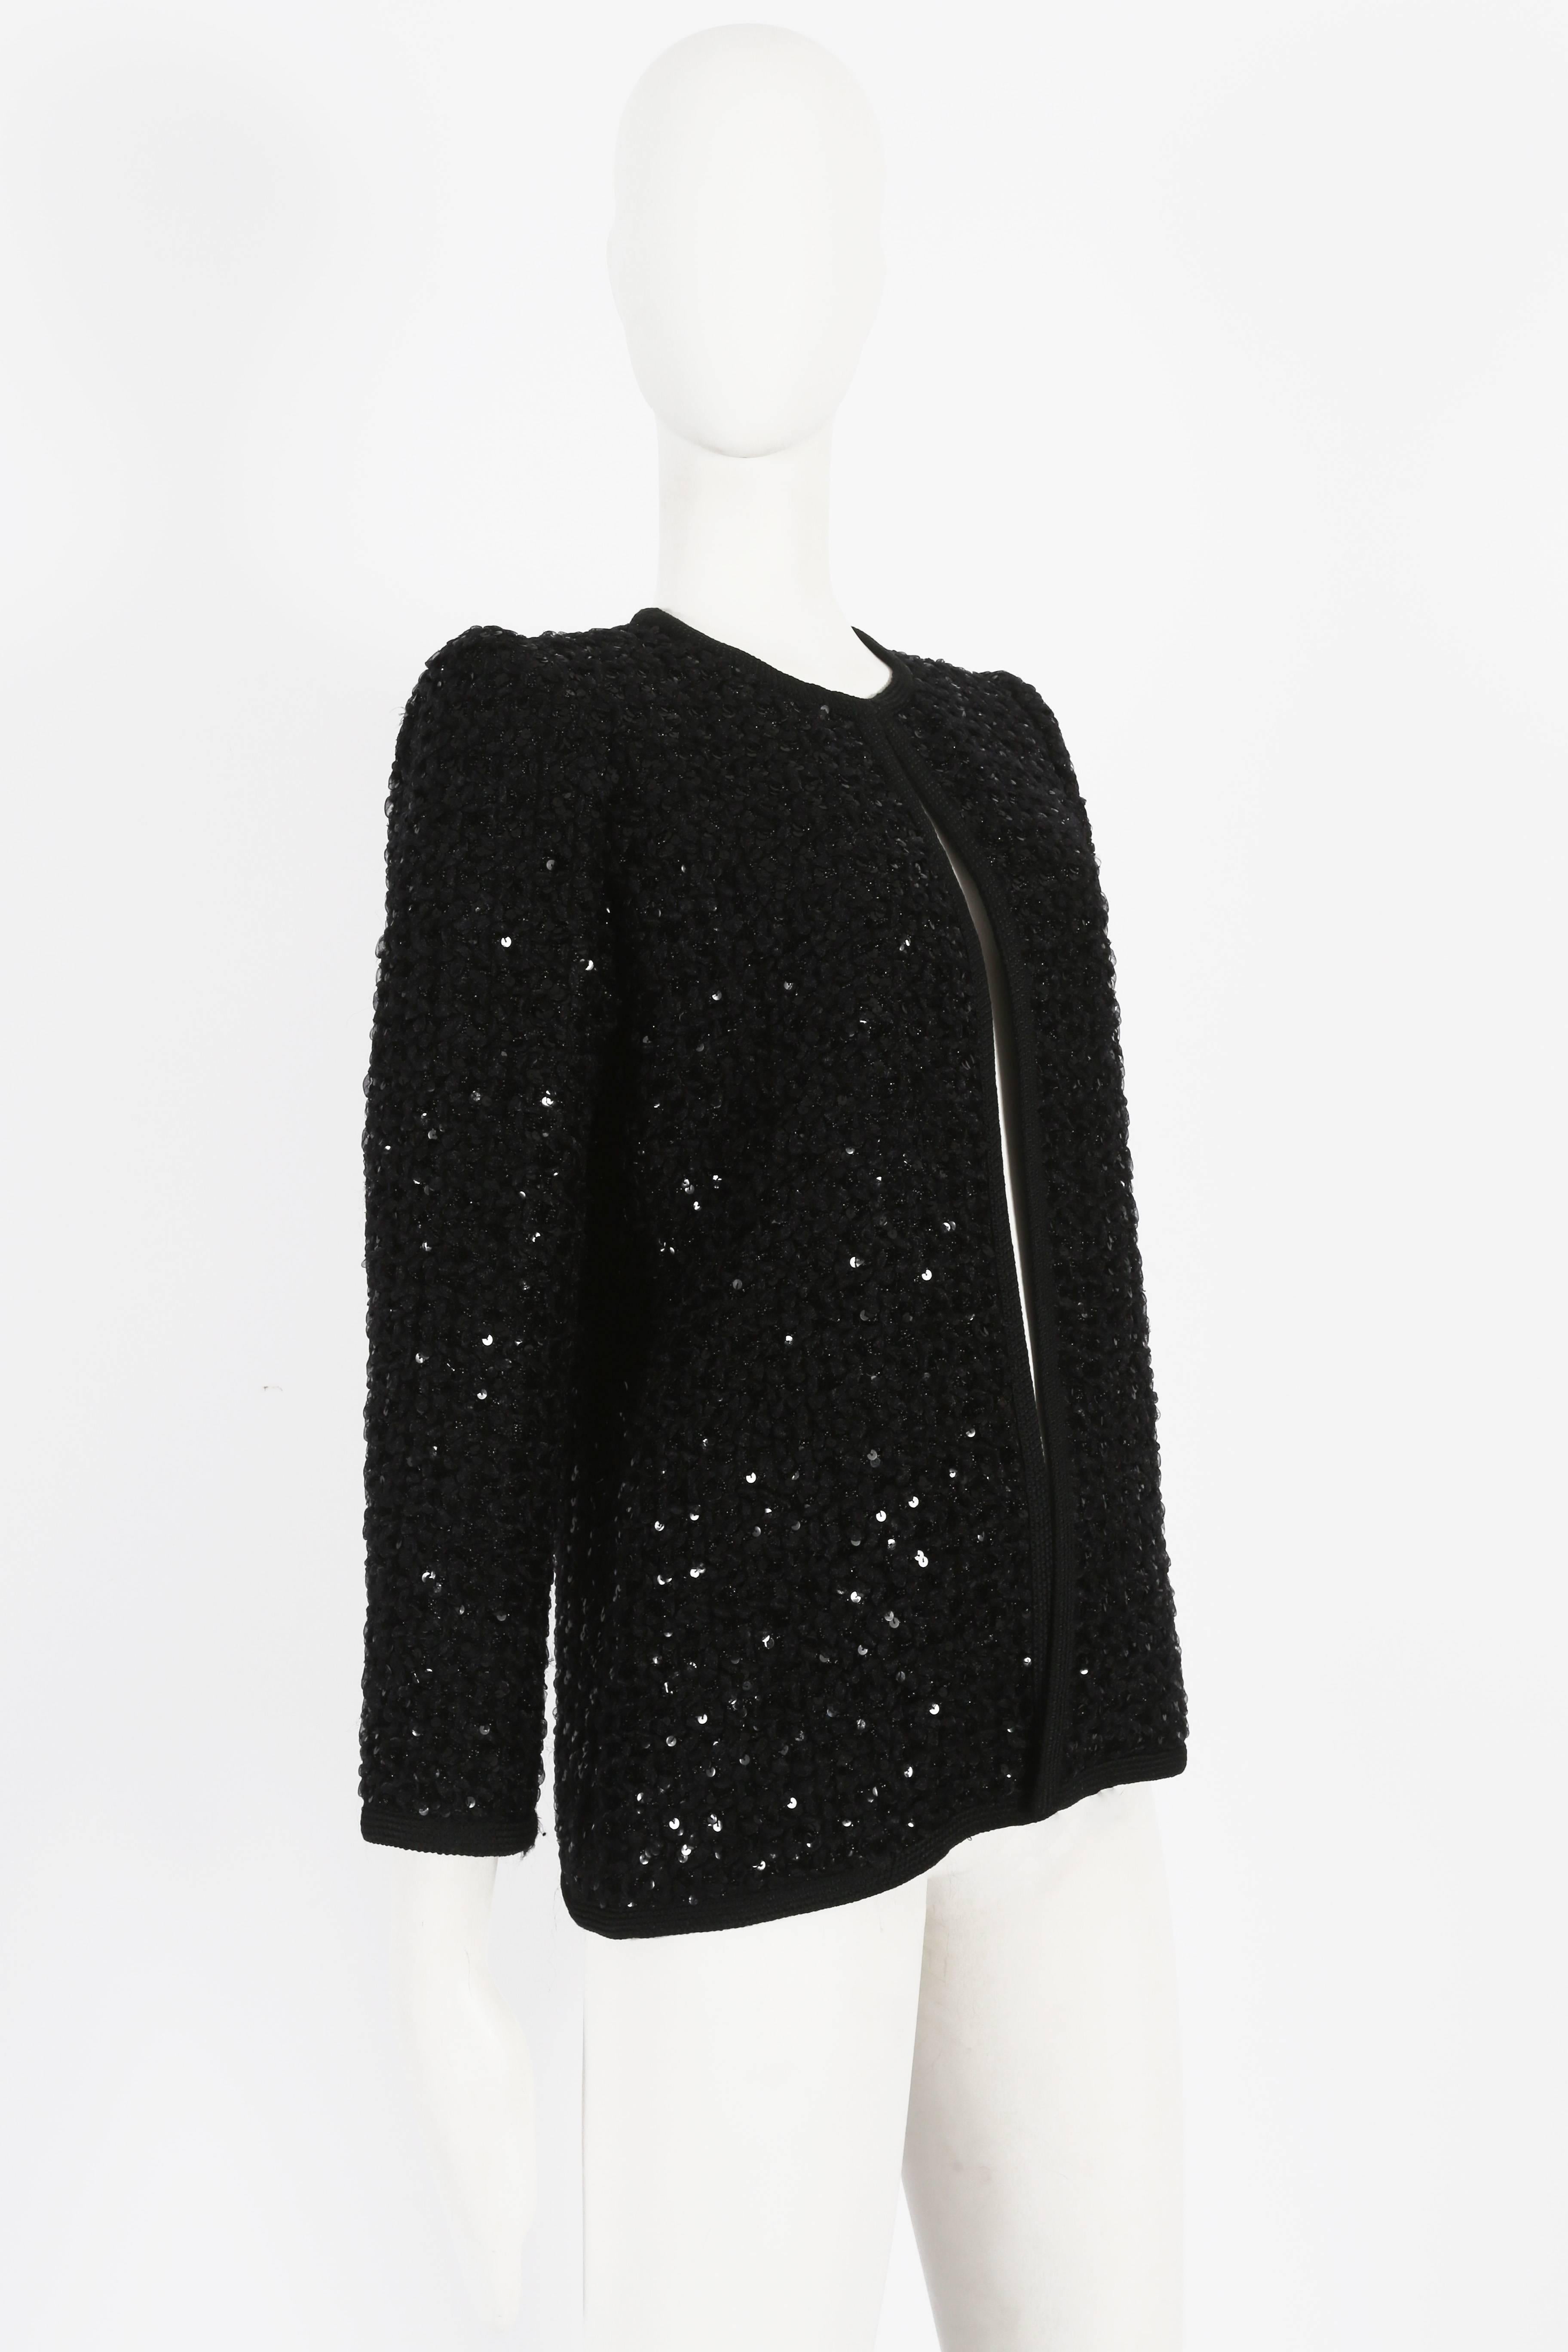 Presenting a Haute Couture Yves Saint Laurent evening jacket from the autumn-winter collection of 1978. This exquisite jacket is a testament to Yves Saint Laurent's legendary artistry and sophistication.

Adorned with black sequins throughout, the